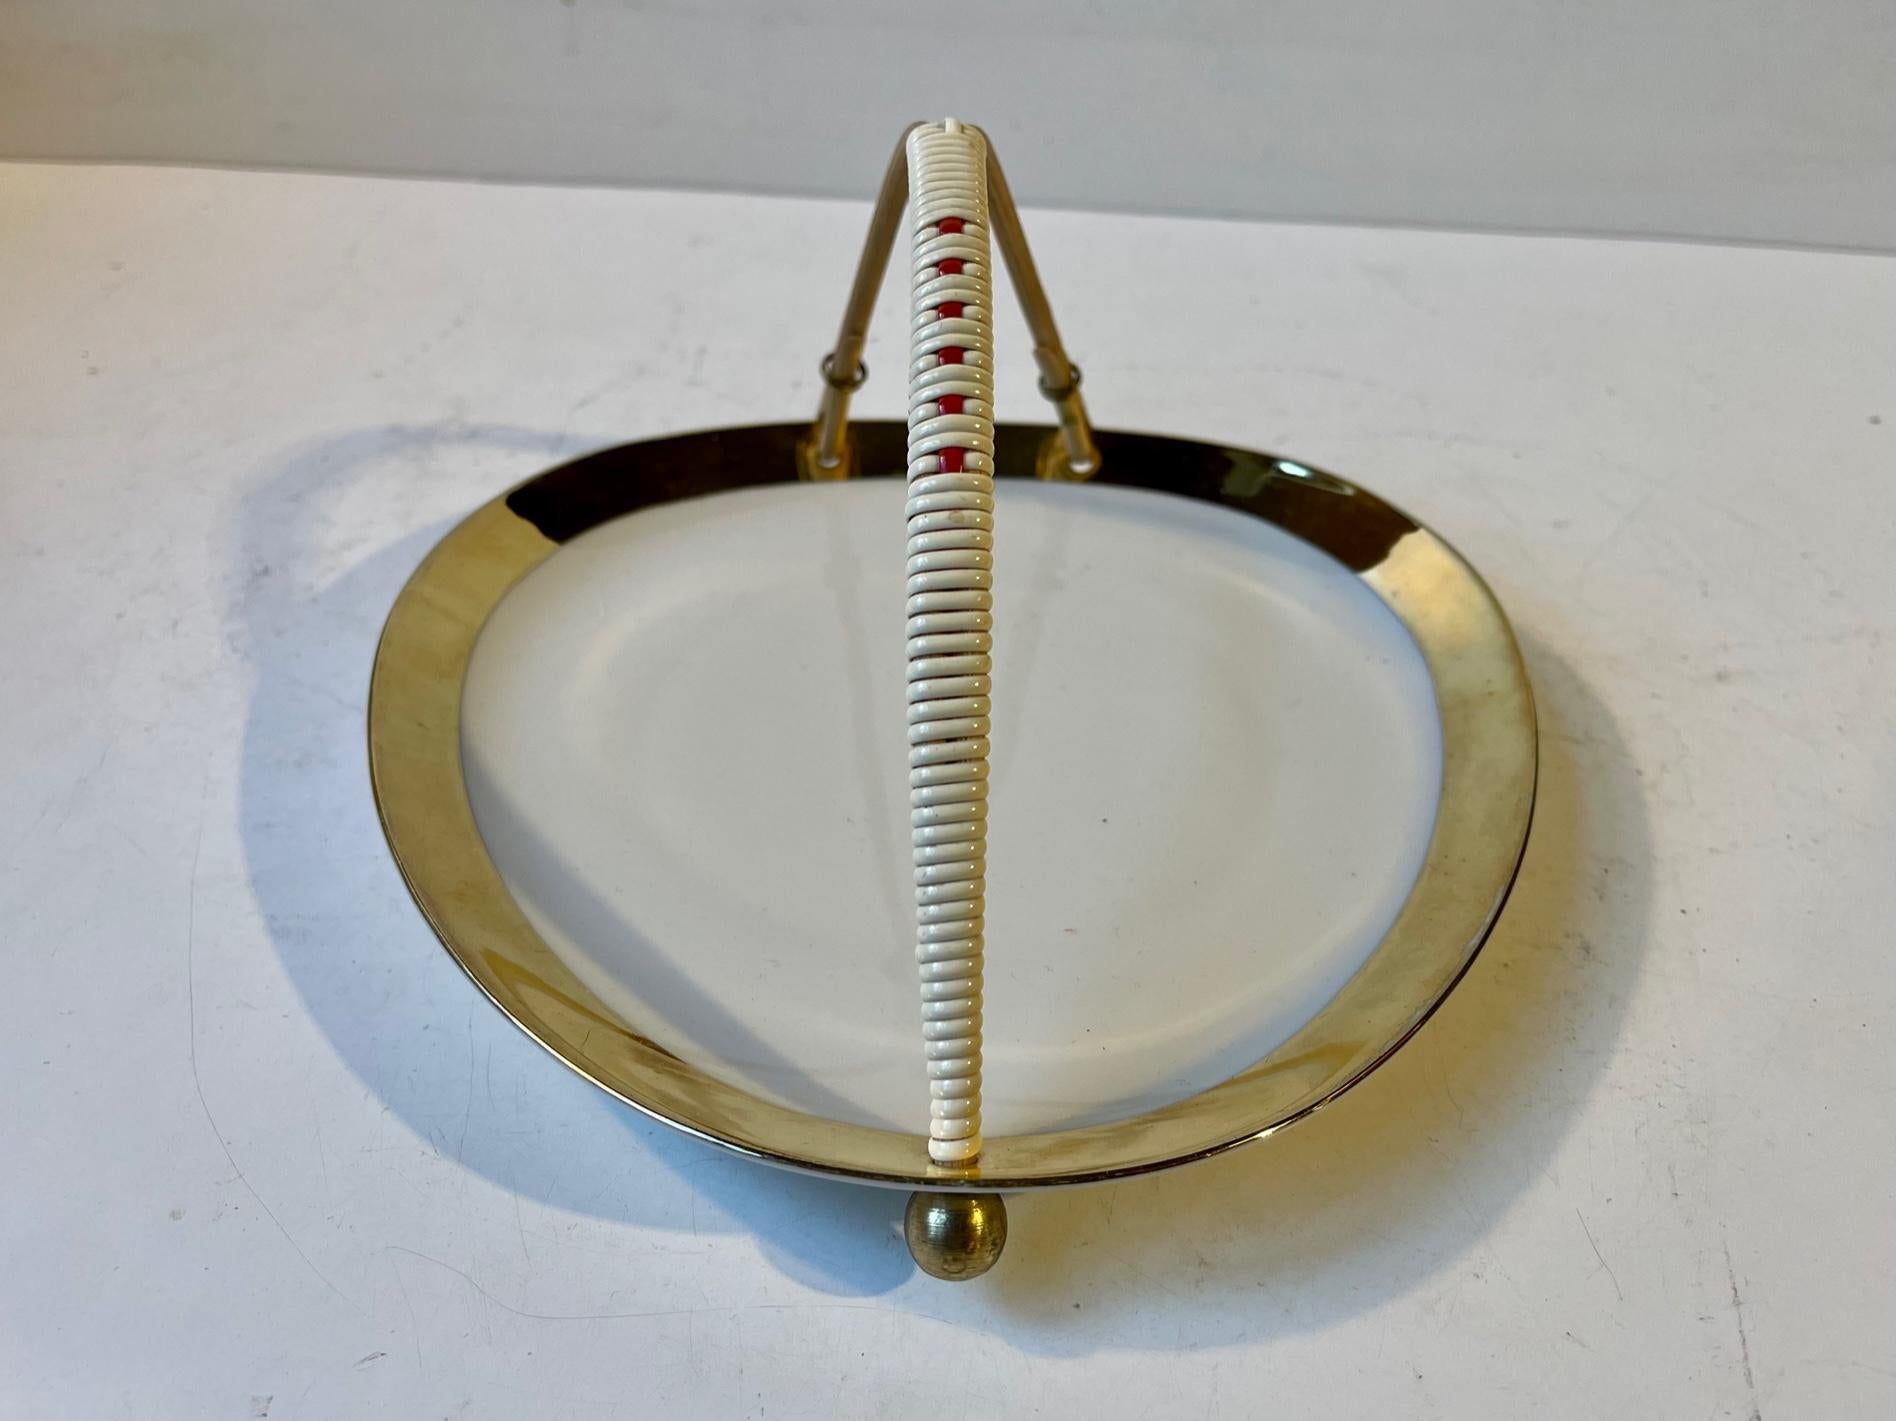 A rare configuration of af JSV chocolate, cake or cookie dish. Decorated with gold-glaze, brass-ball and bamboo handles with plastic rattan. Made by Johann Seltmann Vohenstrauss circa 1950-1960 in Germany. Measurements: 20x20x11 cm.